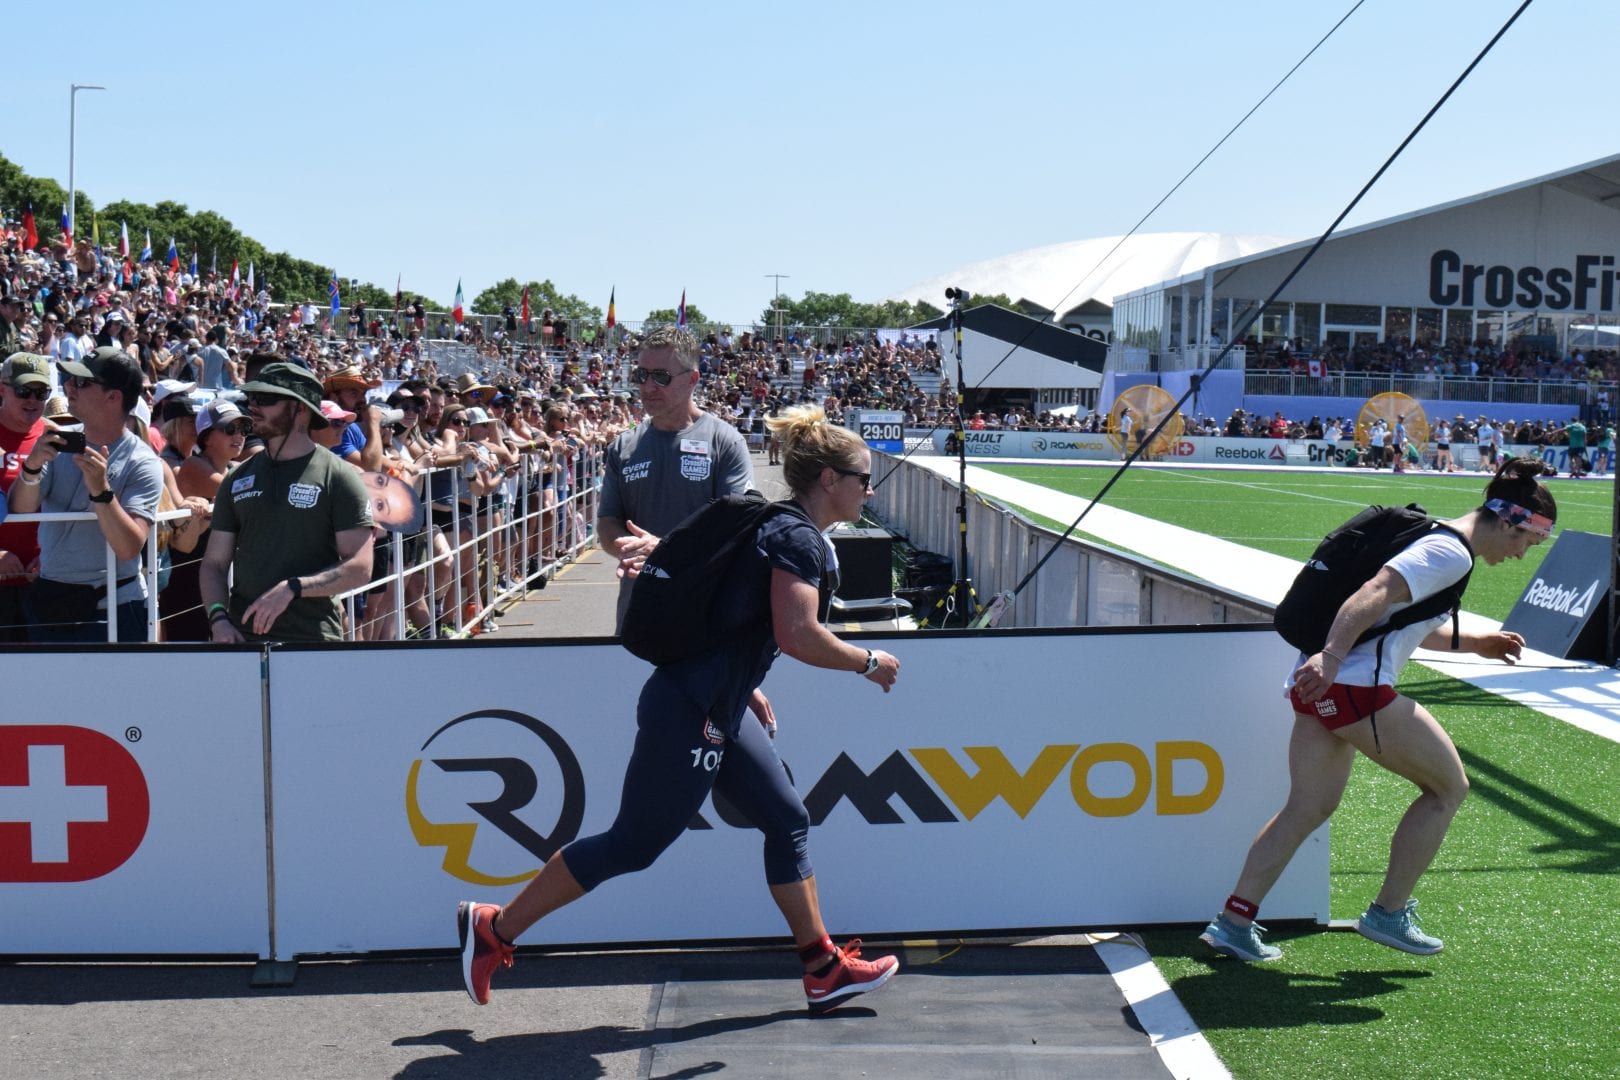 Mekenzie Riley completes the Ruck Run event at the 2019 CrossFit Games